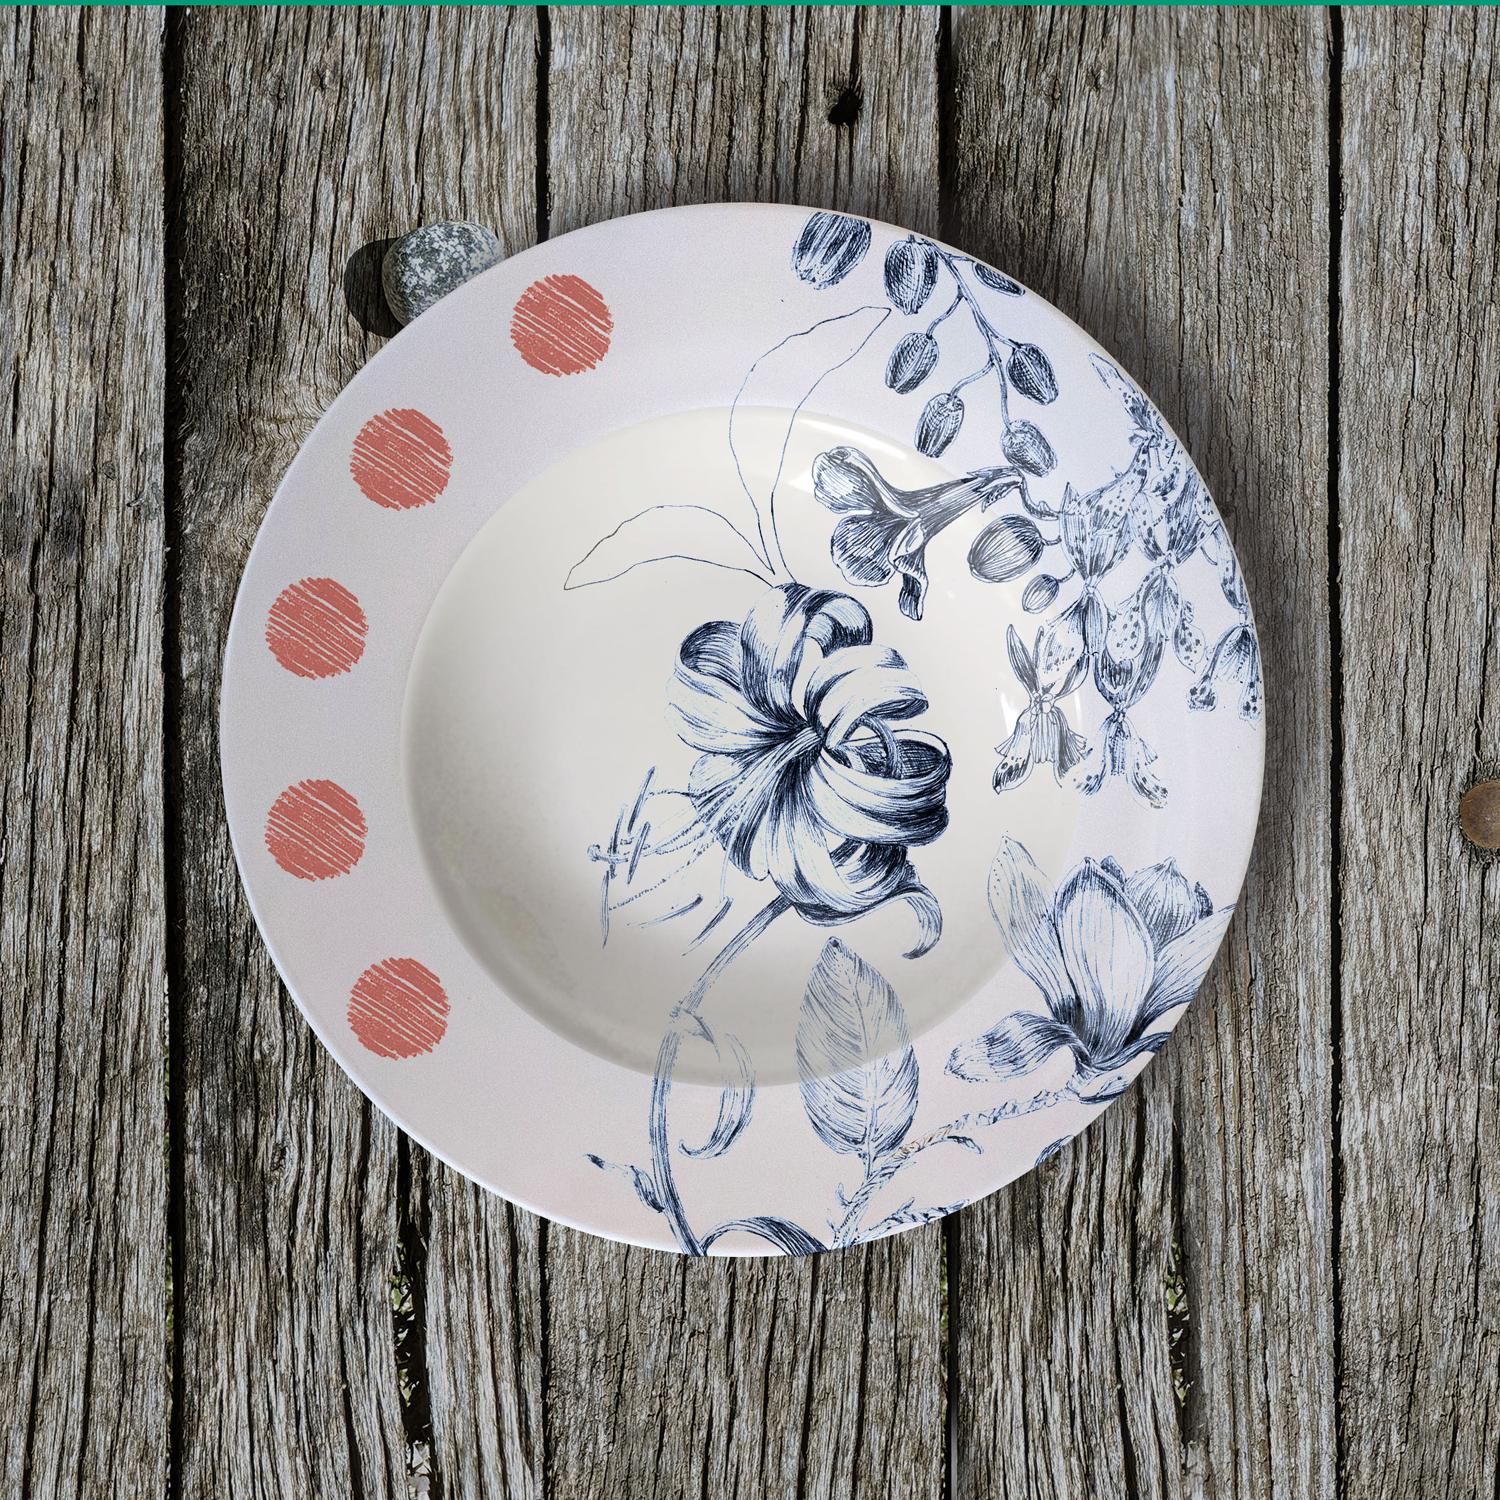 Marie Antoniette pasta plates, are designed as the porcelain set of a contemporary Queen Marie Antoniette, still alive in 2020. It is an explosion of detailed flowers and blossoms, originally hand-painted with an engraving technique that is some